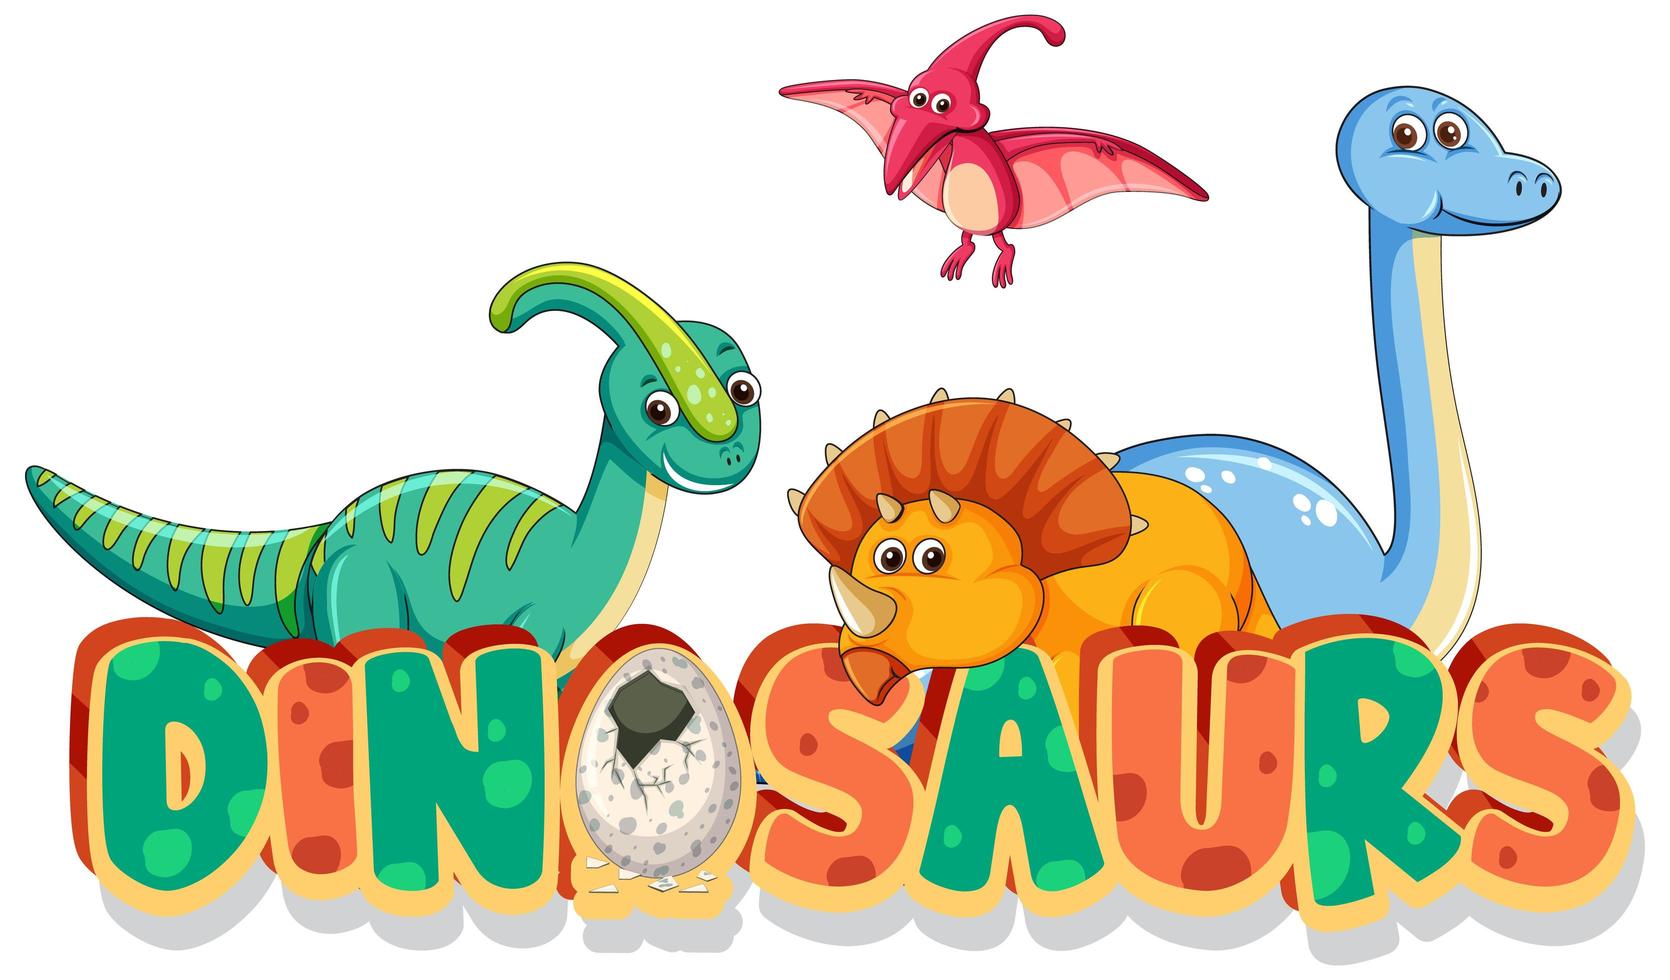 Font design for word dinosaurs with many types of dinosaurs on white background vector